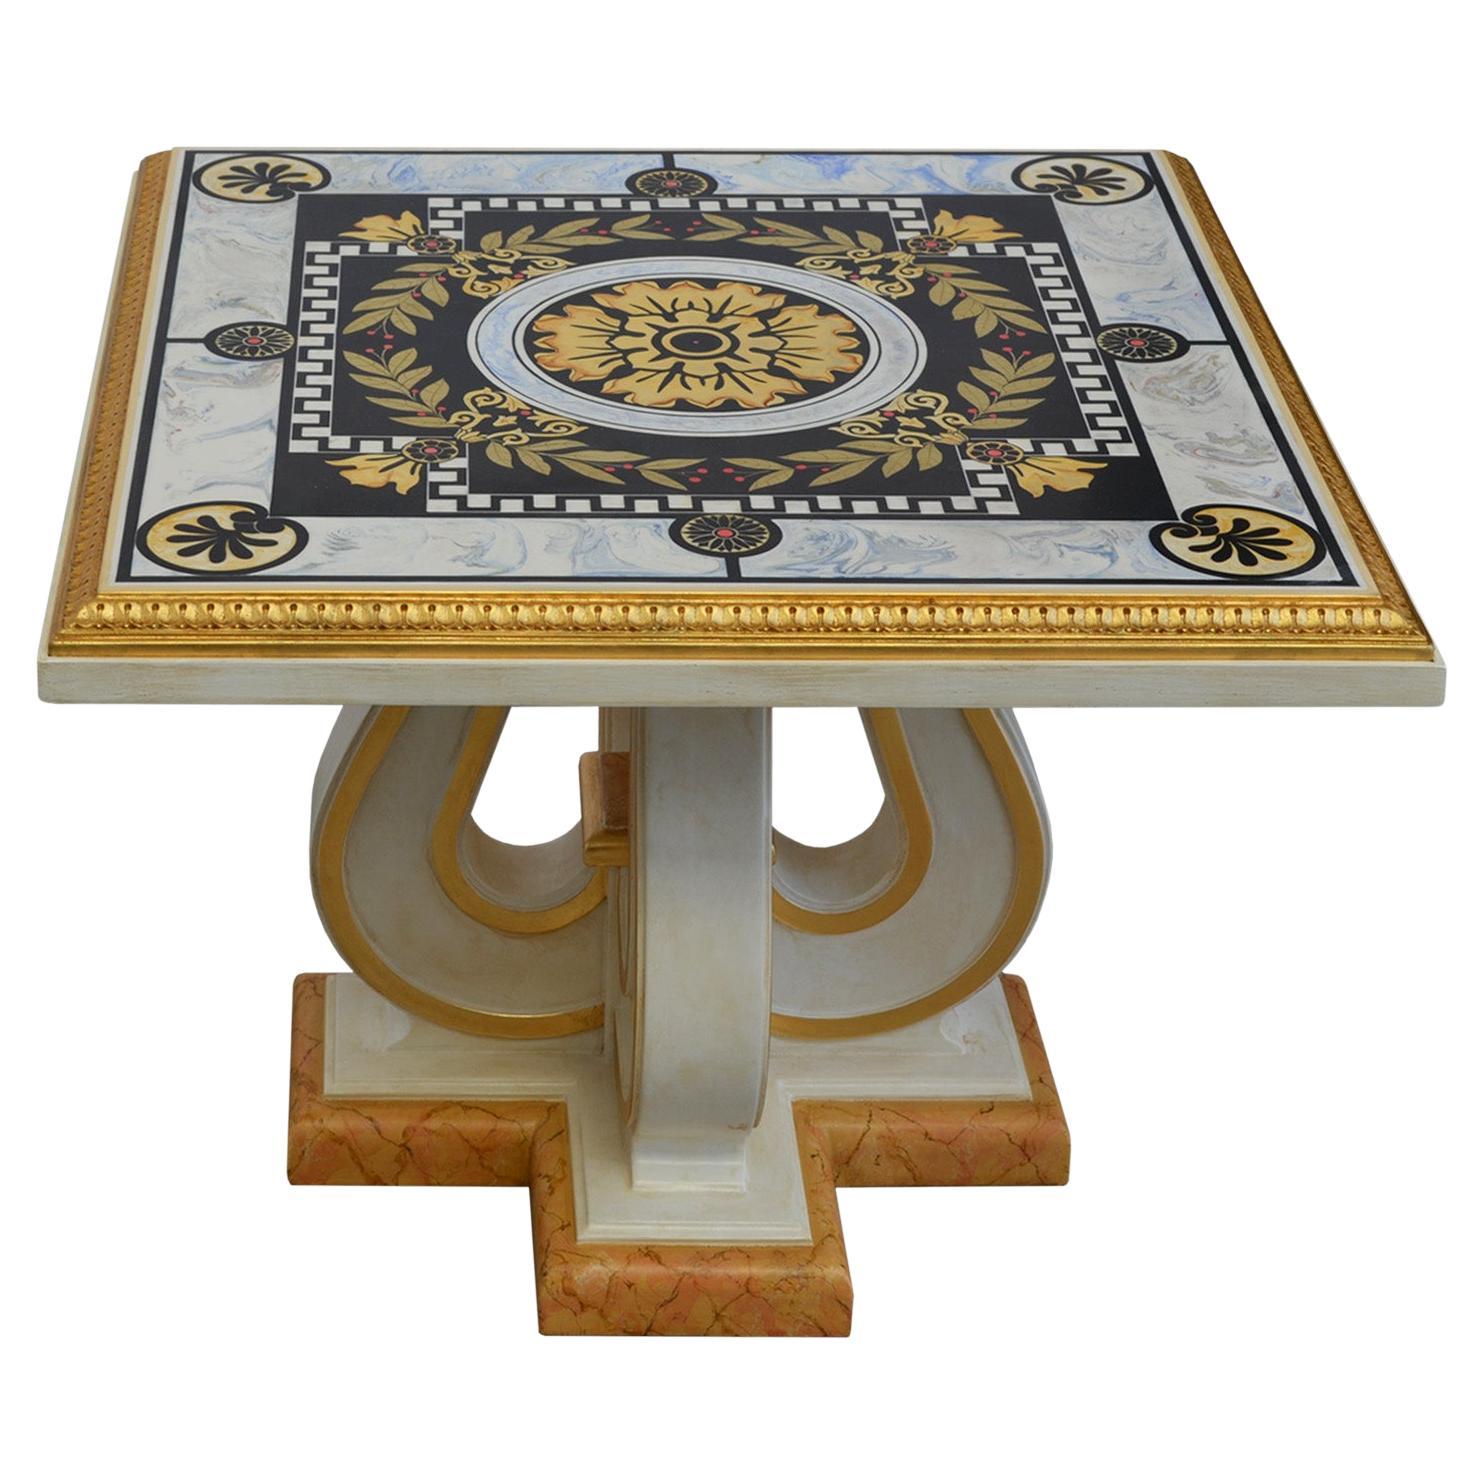 Square Coffee Table  Scagliola Art Top wooden base Handmade in Italy by Cupioli For Sale